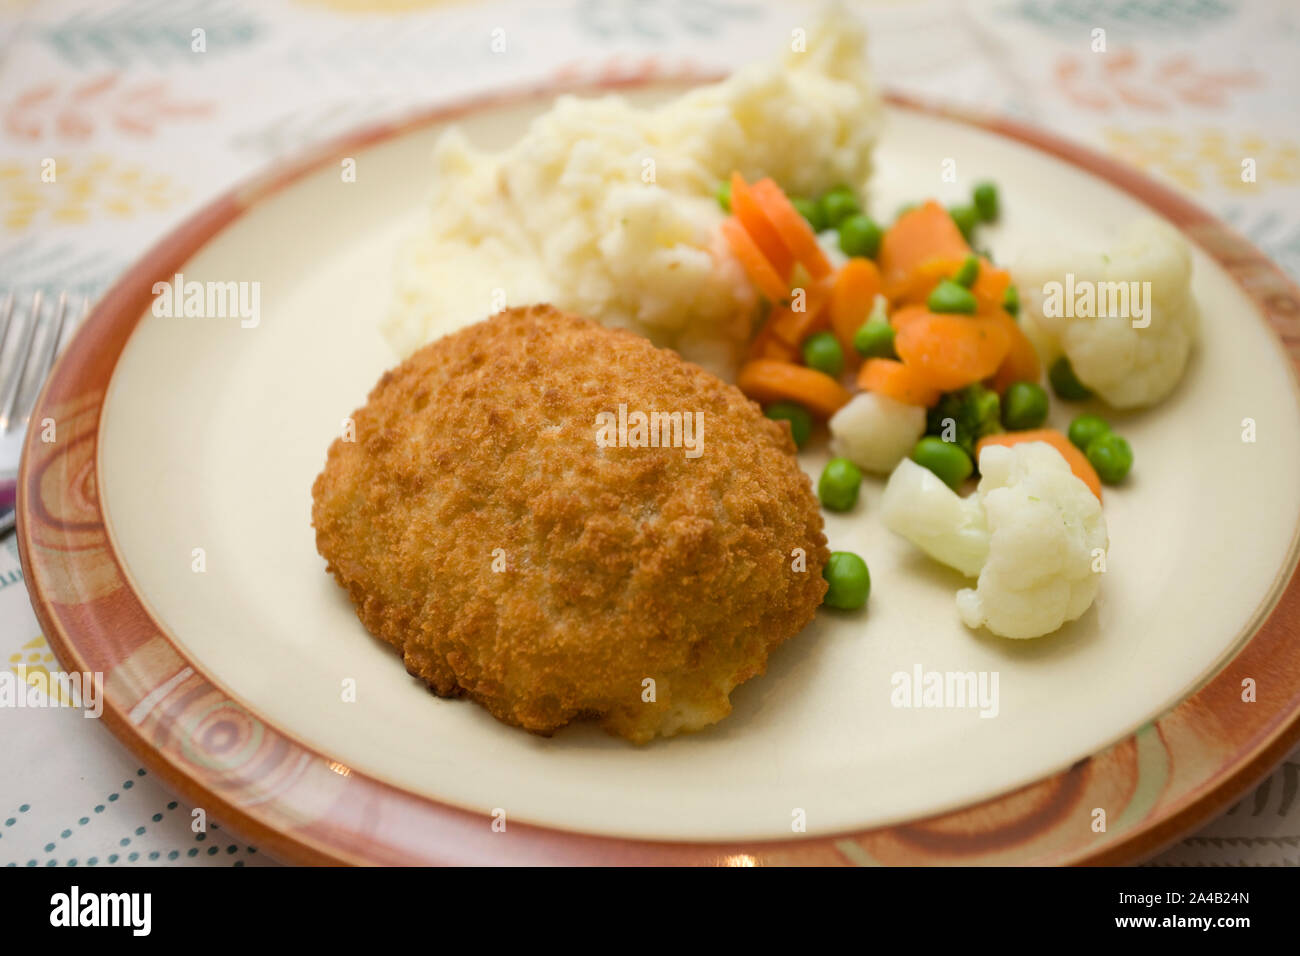 Chicken Kiev with potato and vegetables Stock Photo